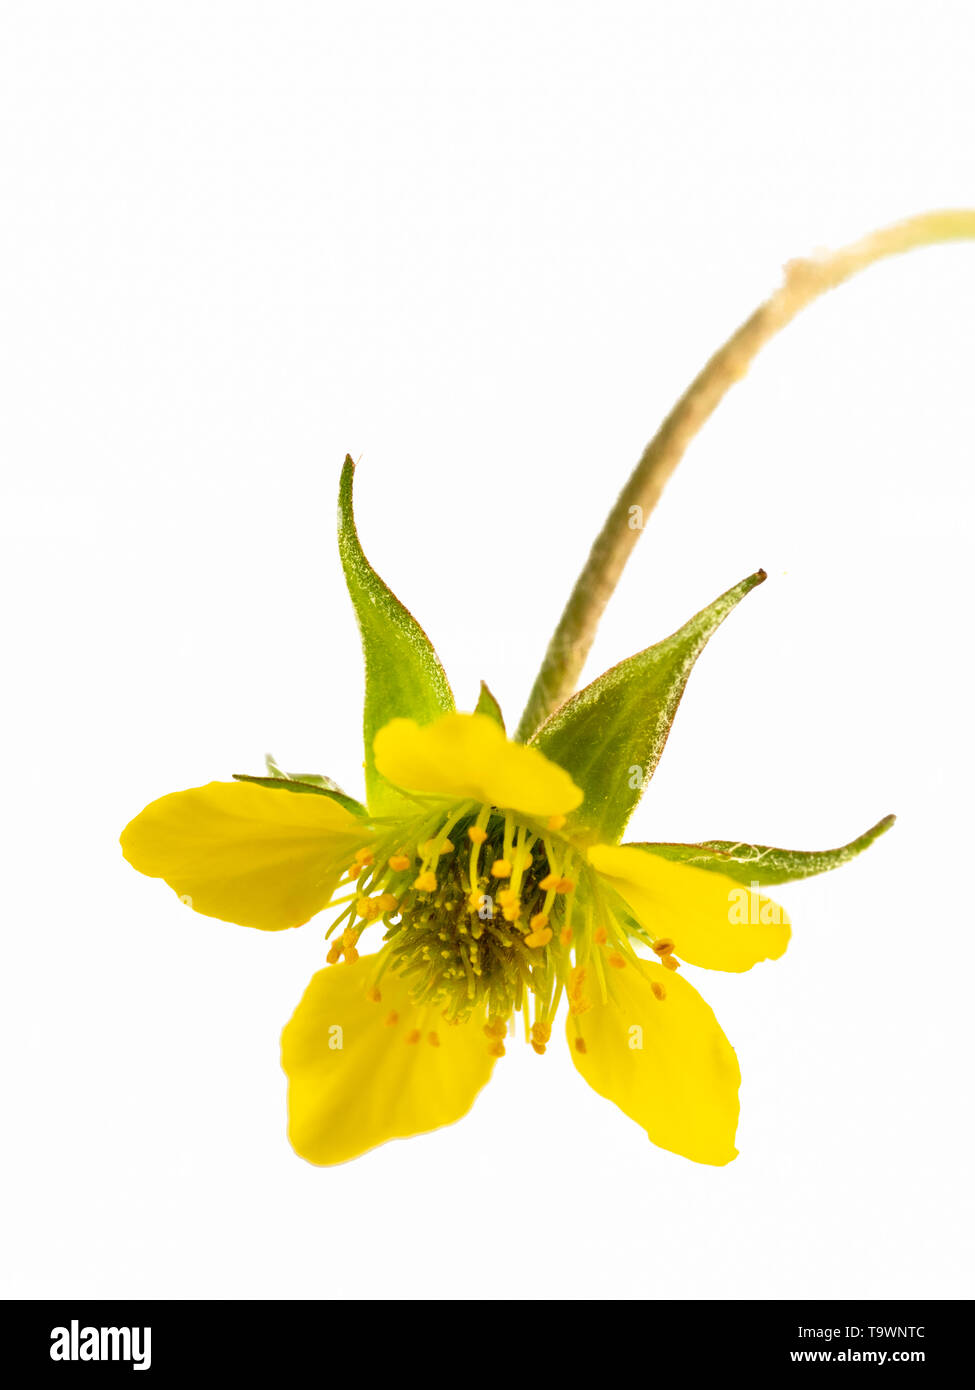 Close up image of a single flower of the wood avens, Geum urbanum, on a white background Stock Photo